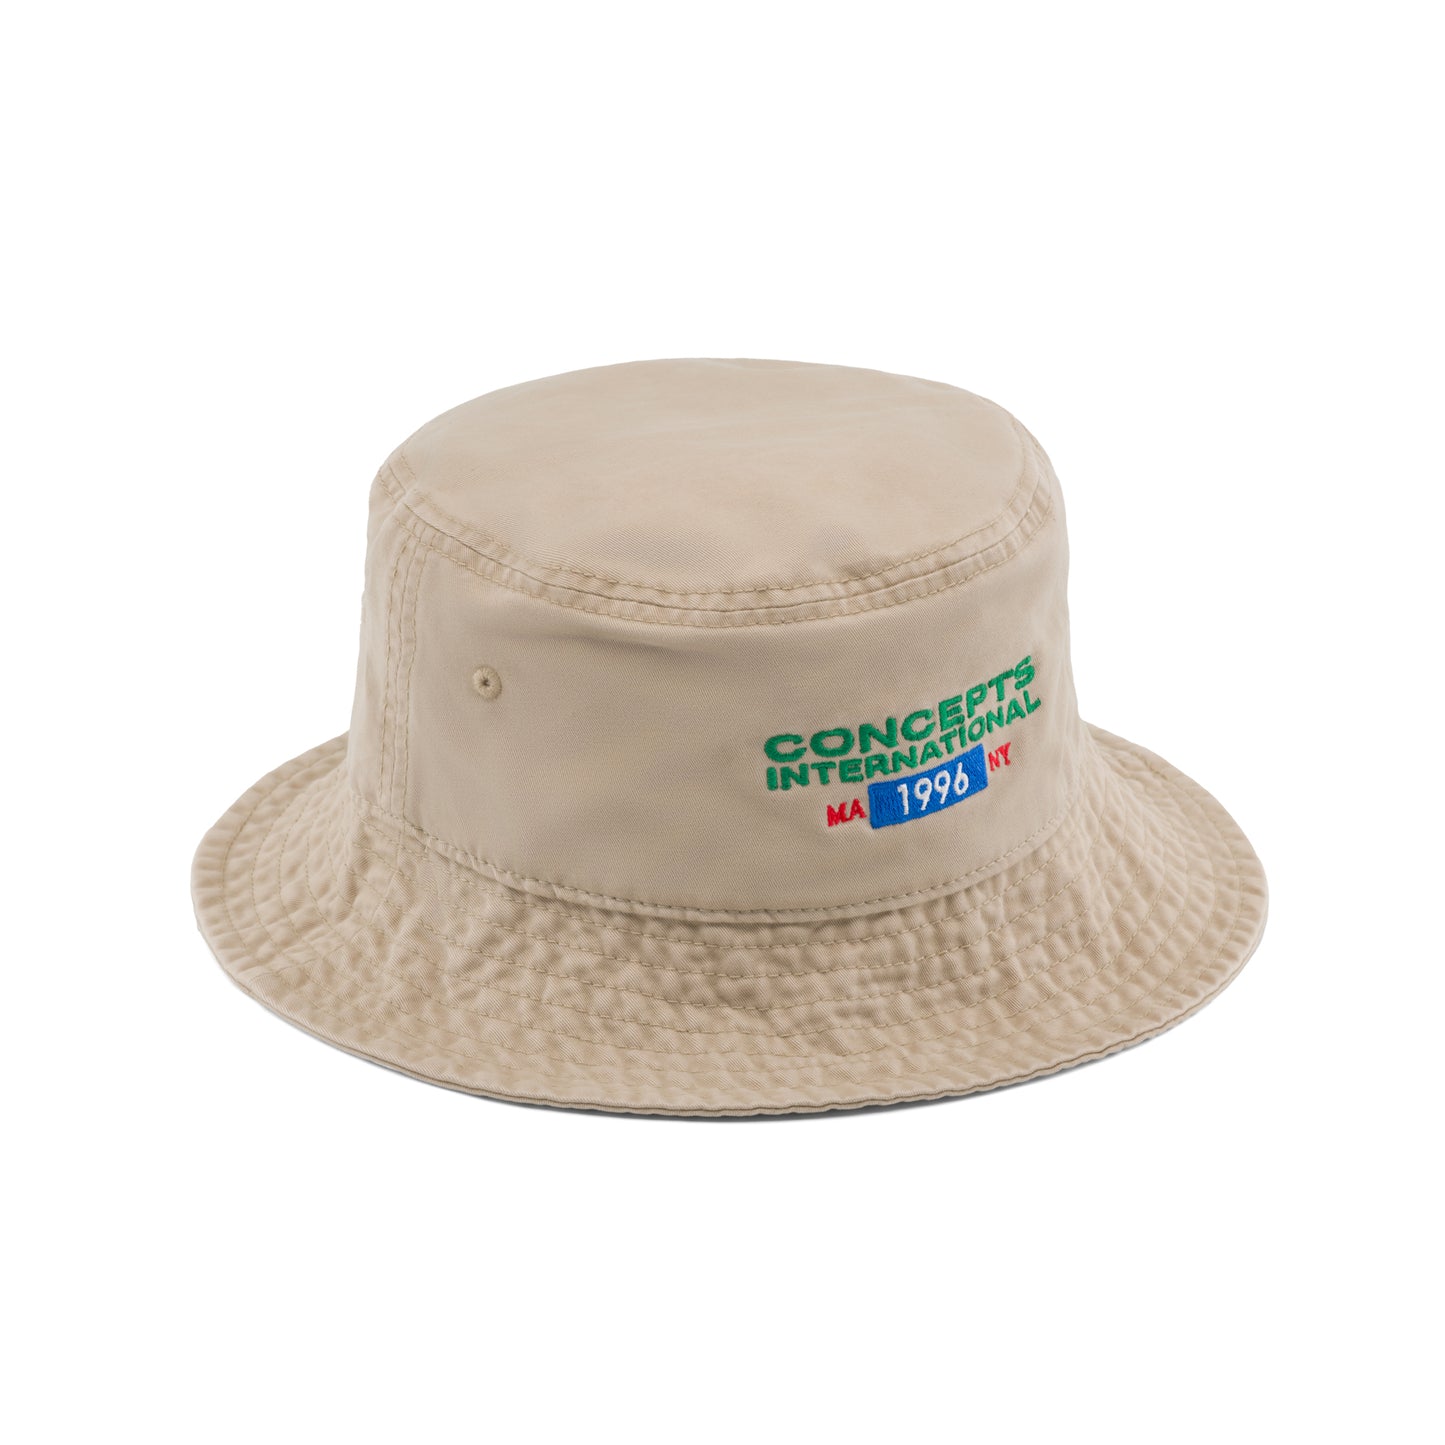 Concepts Intl 1996 Bucket Hat (Washed Taupe)